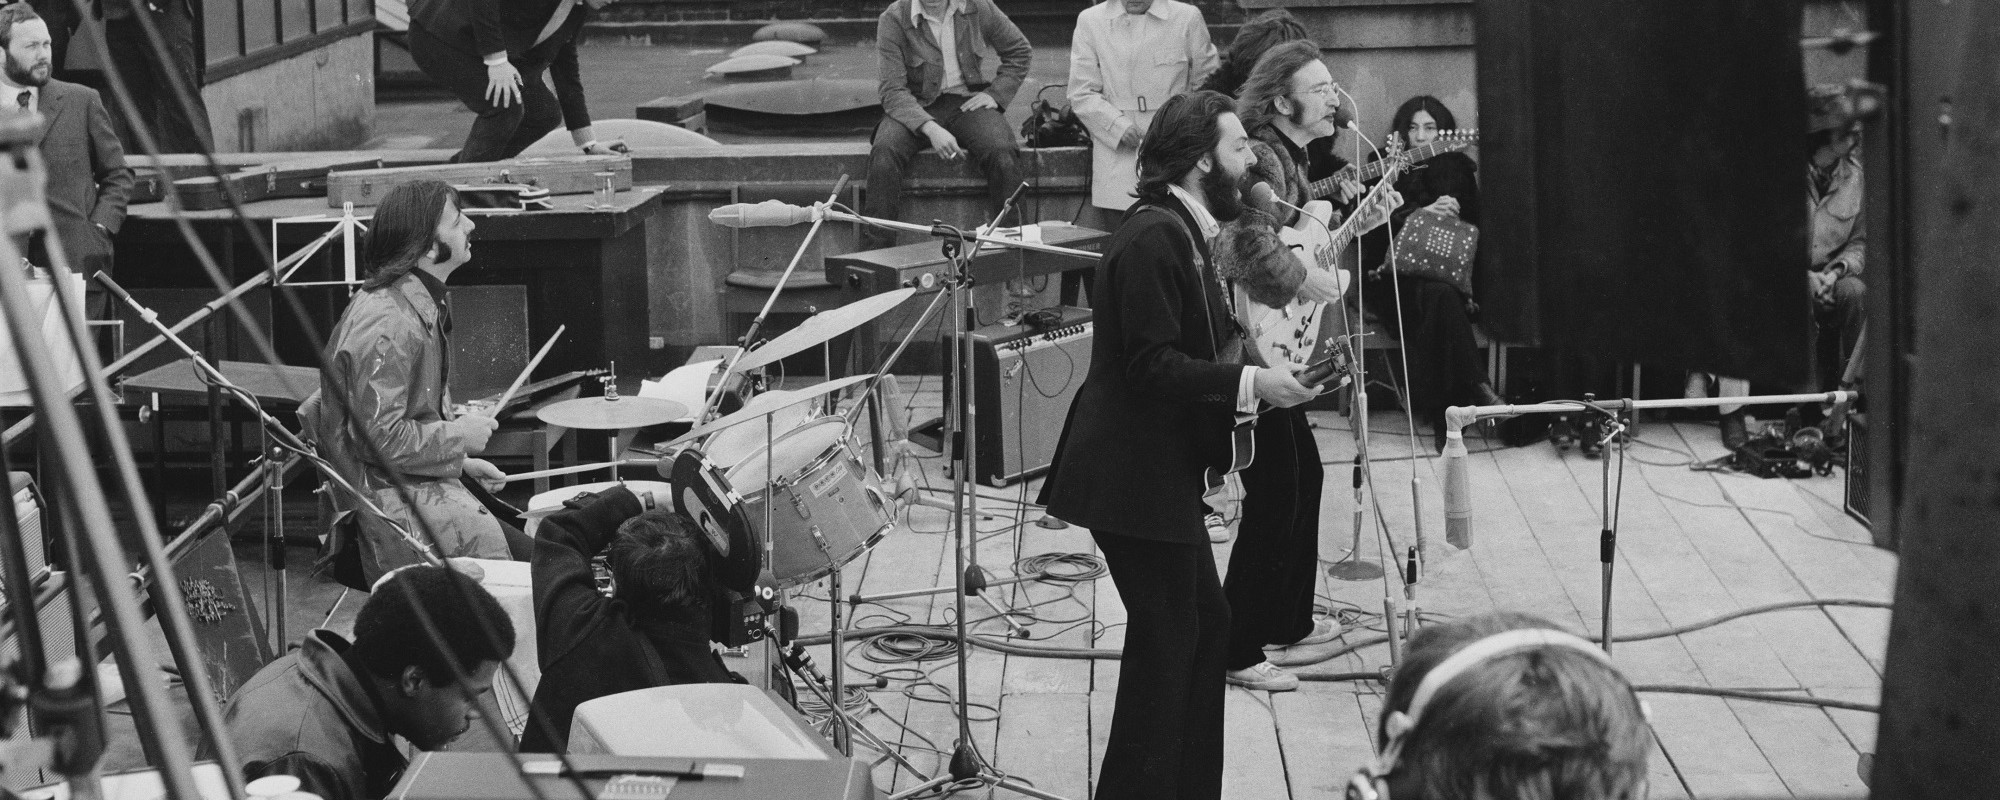 “There Will Be an Answer”: The Beatles Cryptic Message Has Fans Connecting Dots to the ‘Let It Be’ Movie